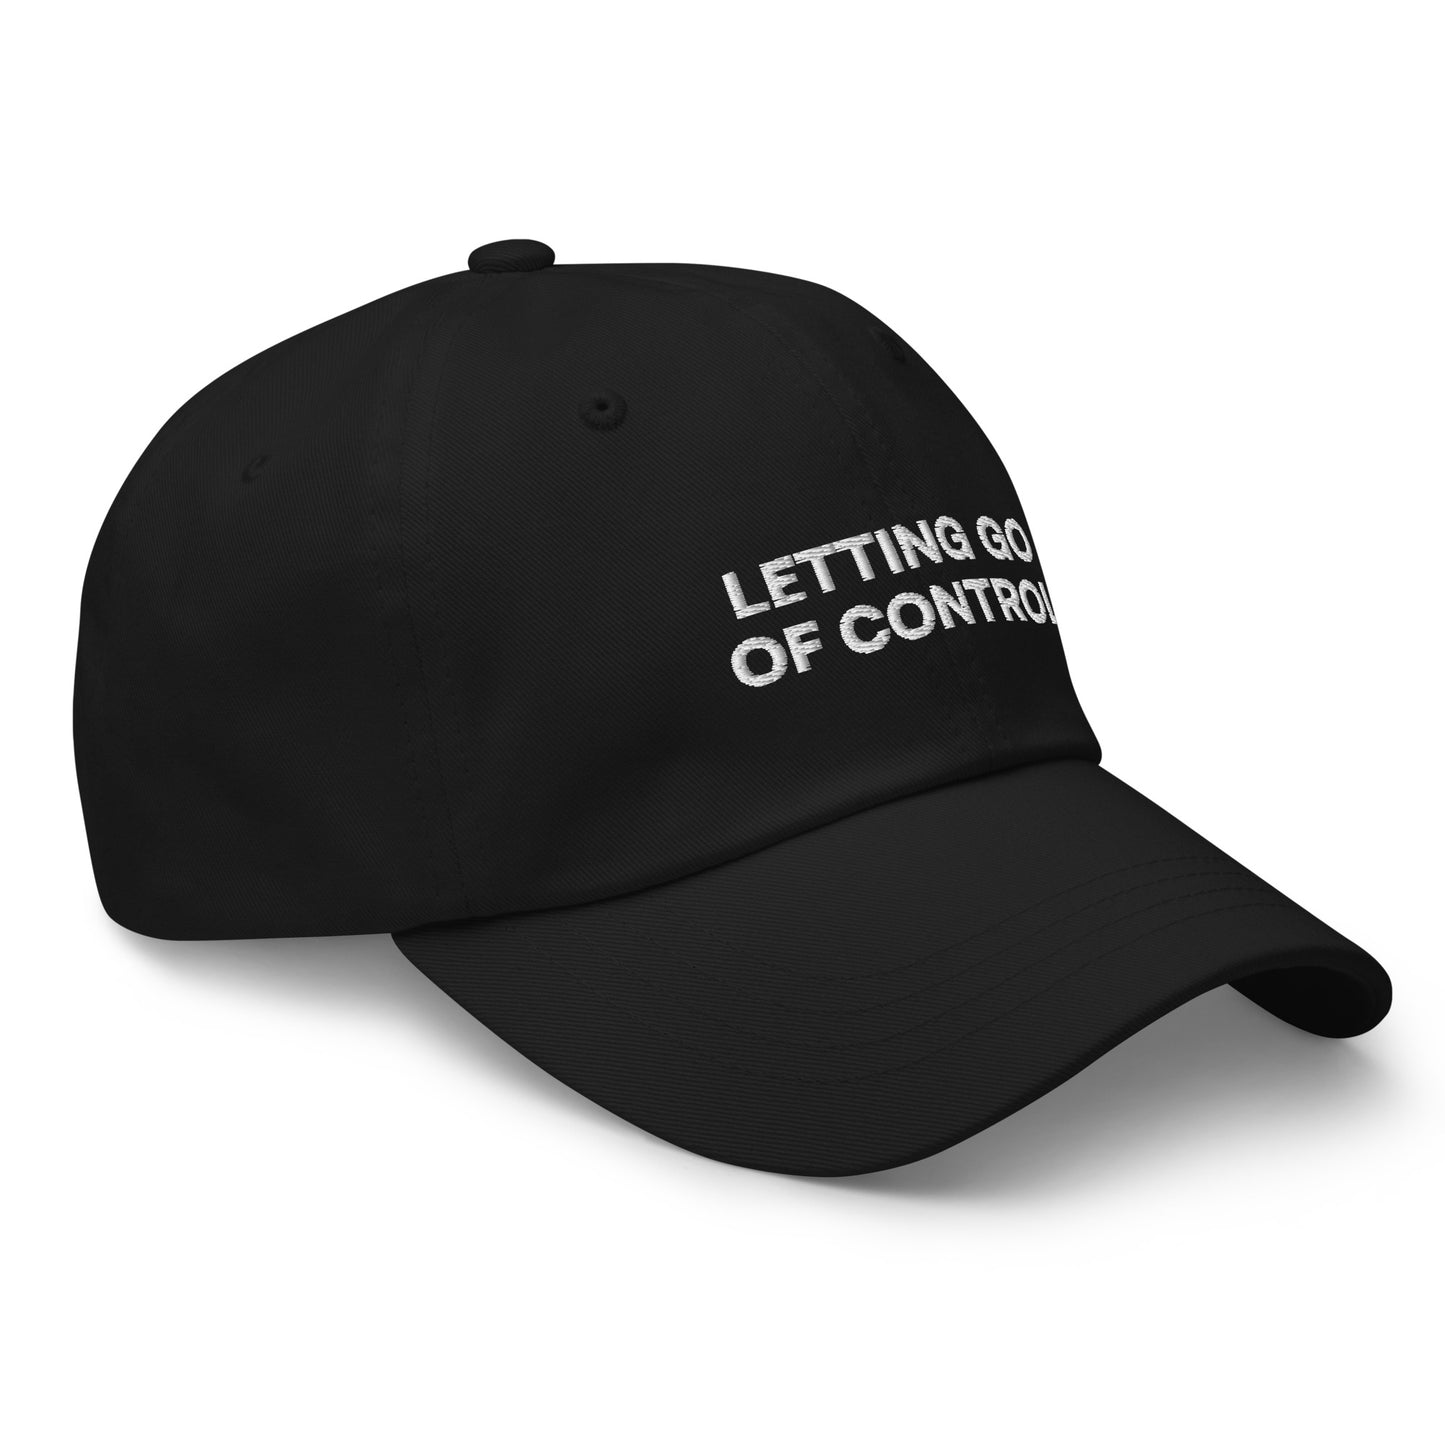 LETTING GO OF CONTROL (NAVY BLUE HAT)